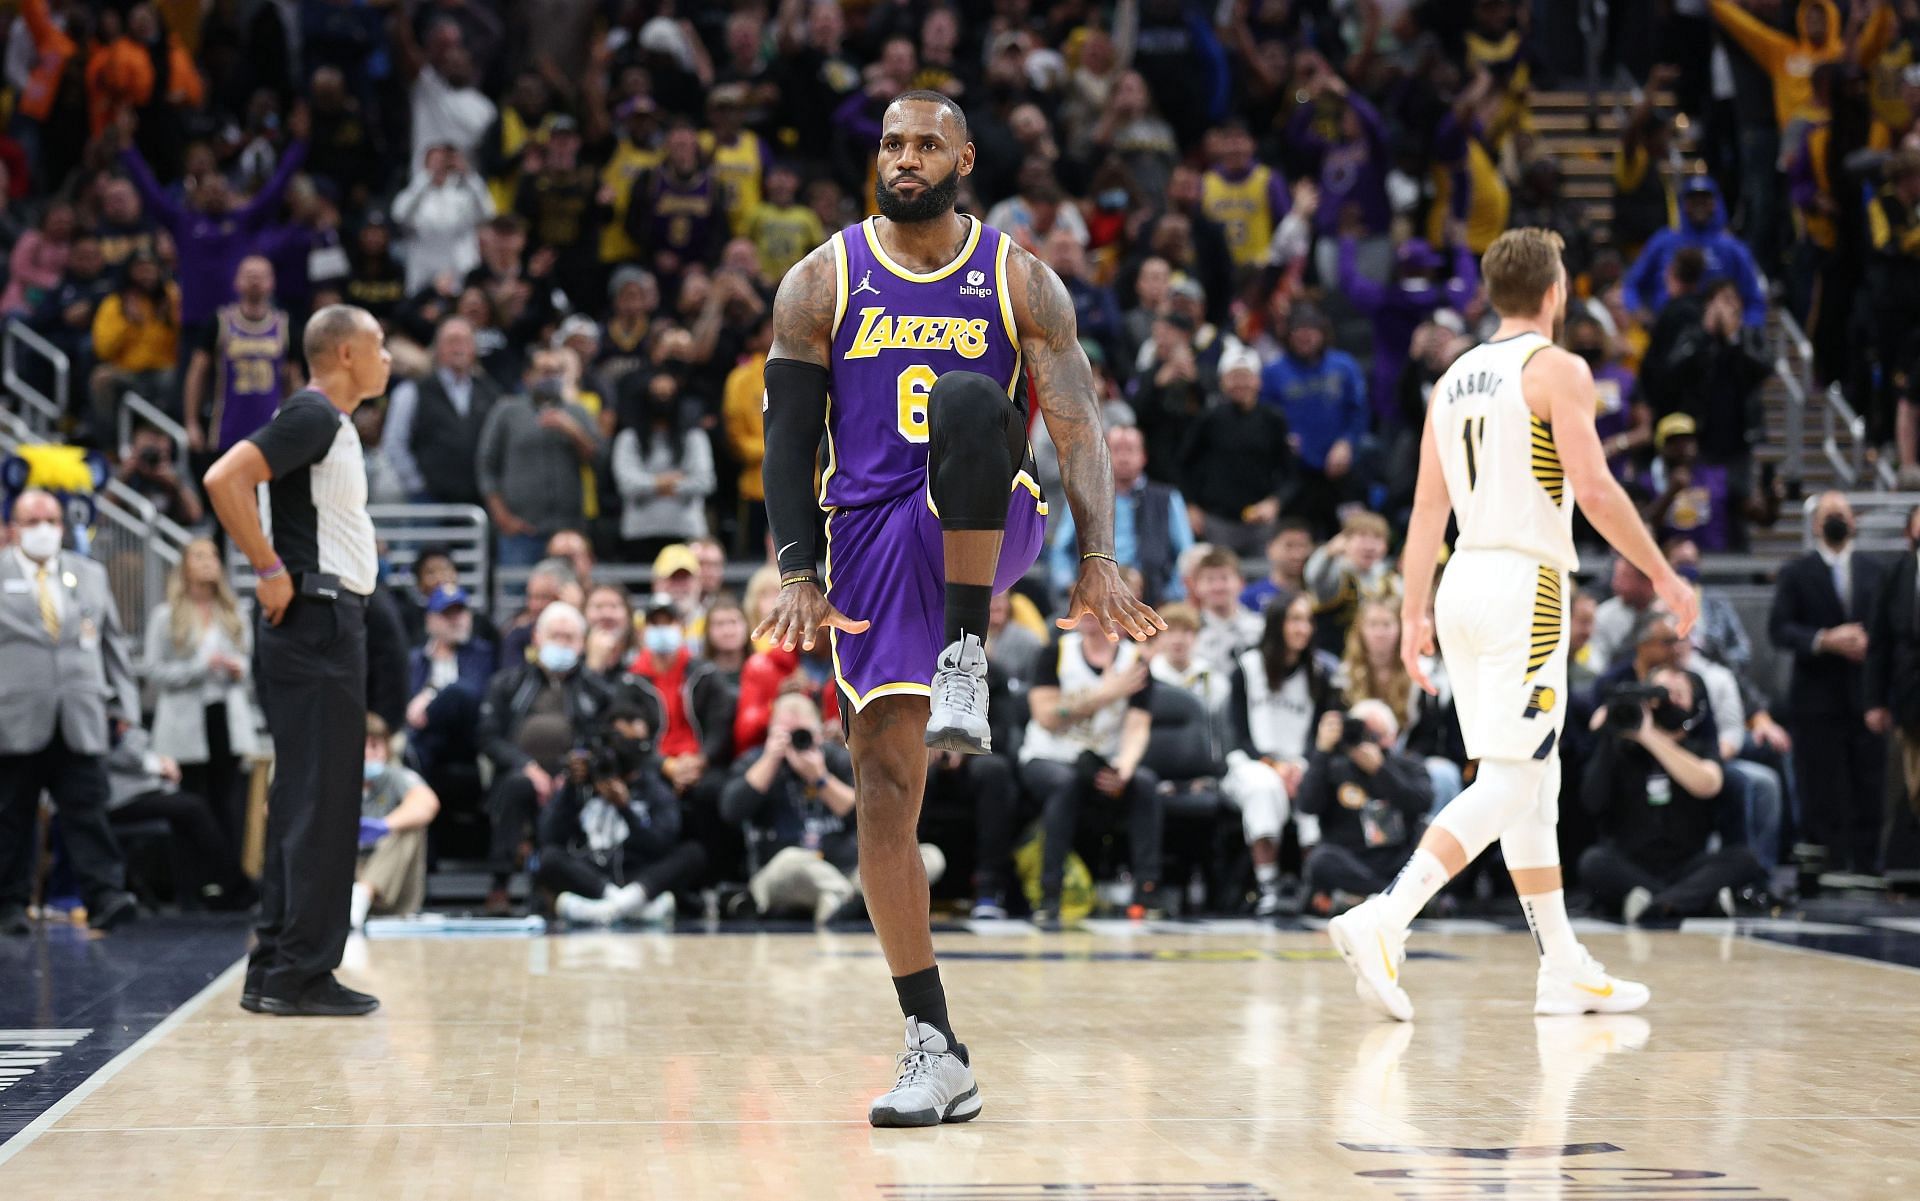 Los Angeles Lakers All-Star LeBron James celebrates a 3-pointer